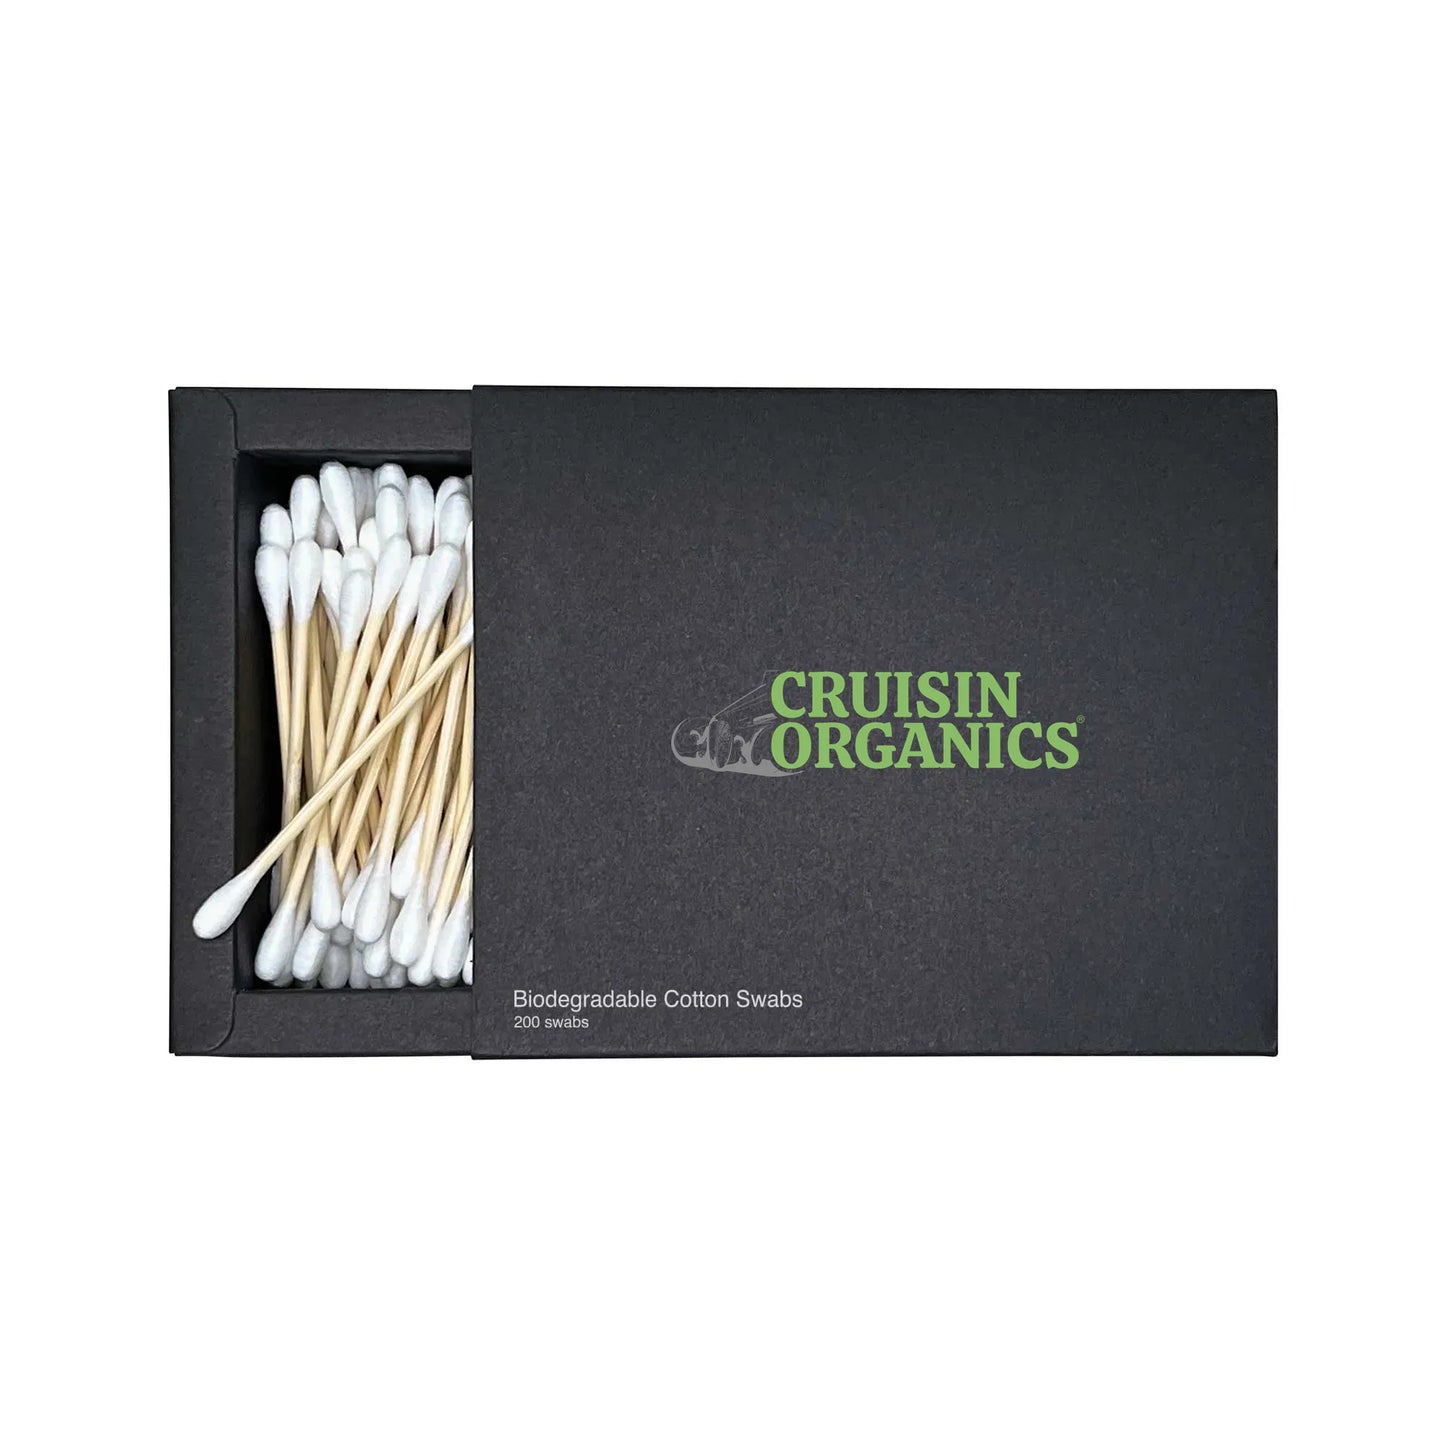 Cruisin Organics ultra-soft, 100% pure cotton, and biodegradable swabs to your daily beauty routine. Never worry about making mistakes when applying makeup; use these cotton swabs to do touch-ups and wipe away imperfections. Perfect for all skin types, take full advantage of our pure cotton and bamboo stem cotton swabs for ear cleaning, makeup application, and removal! The best part? Each cotton swab is biodegradable, eco-friendly, and disposable.  The box contains 200 swabs.